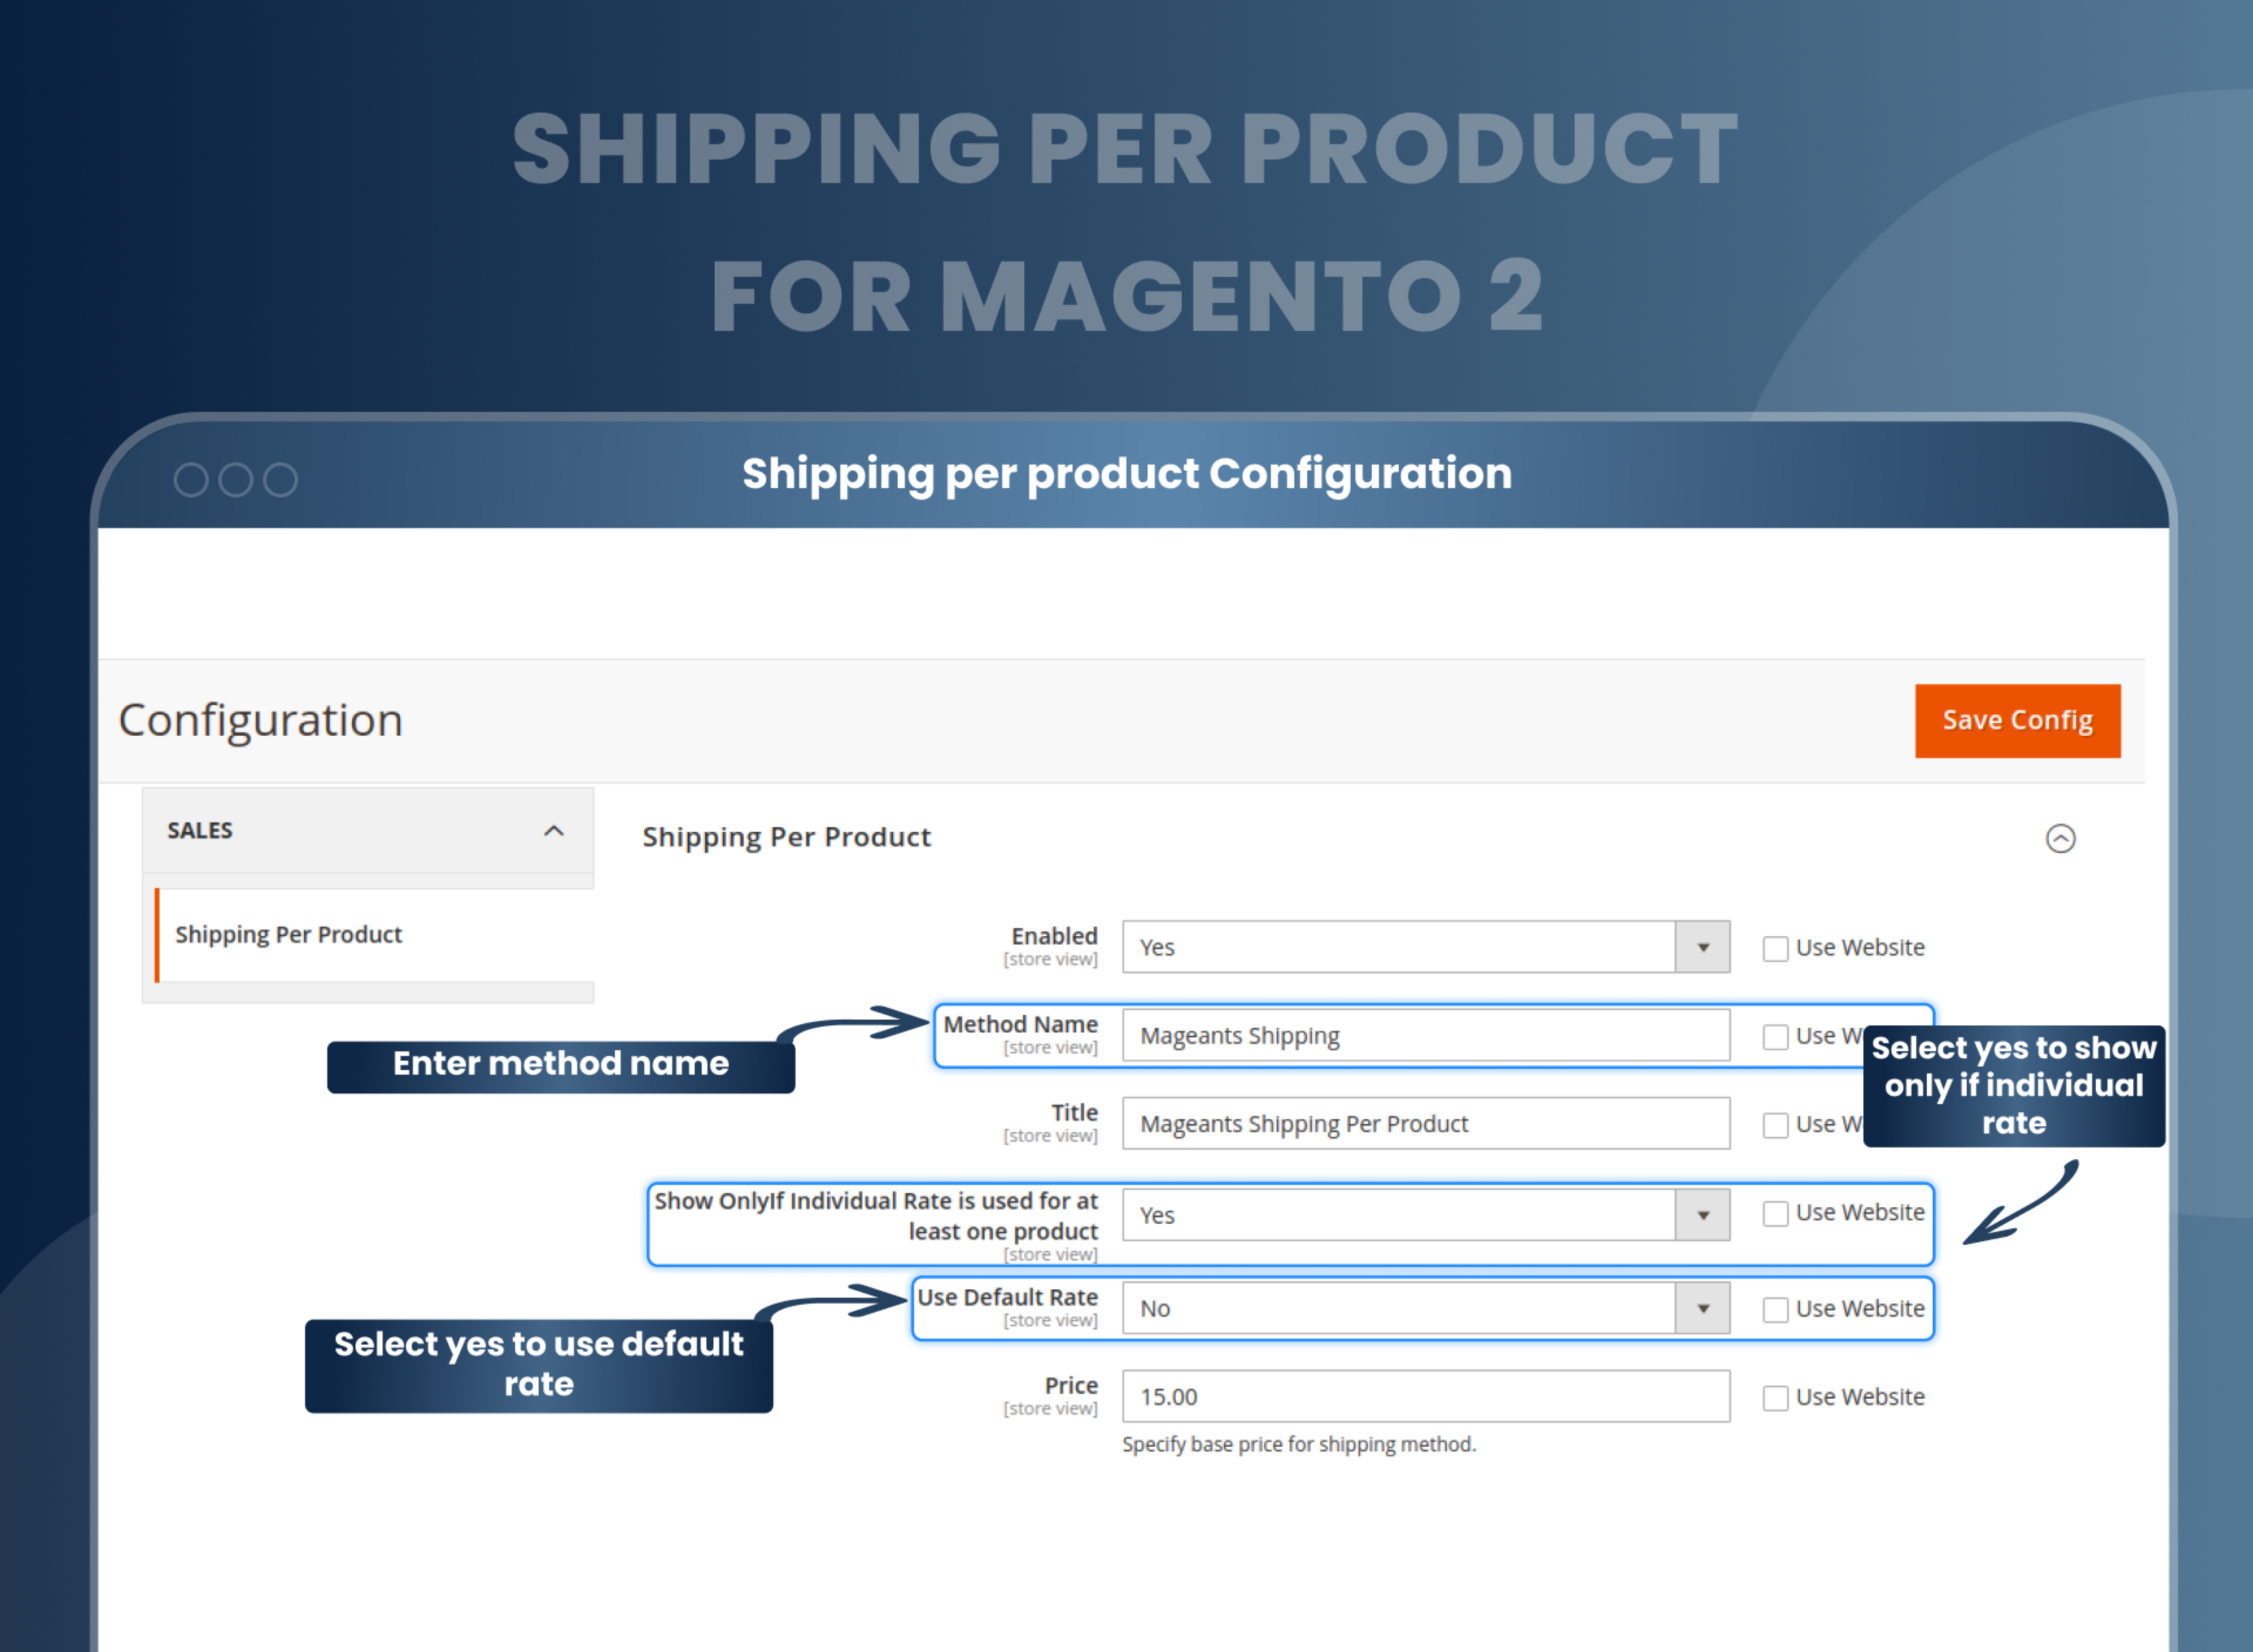 Shipping per product Configuration